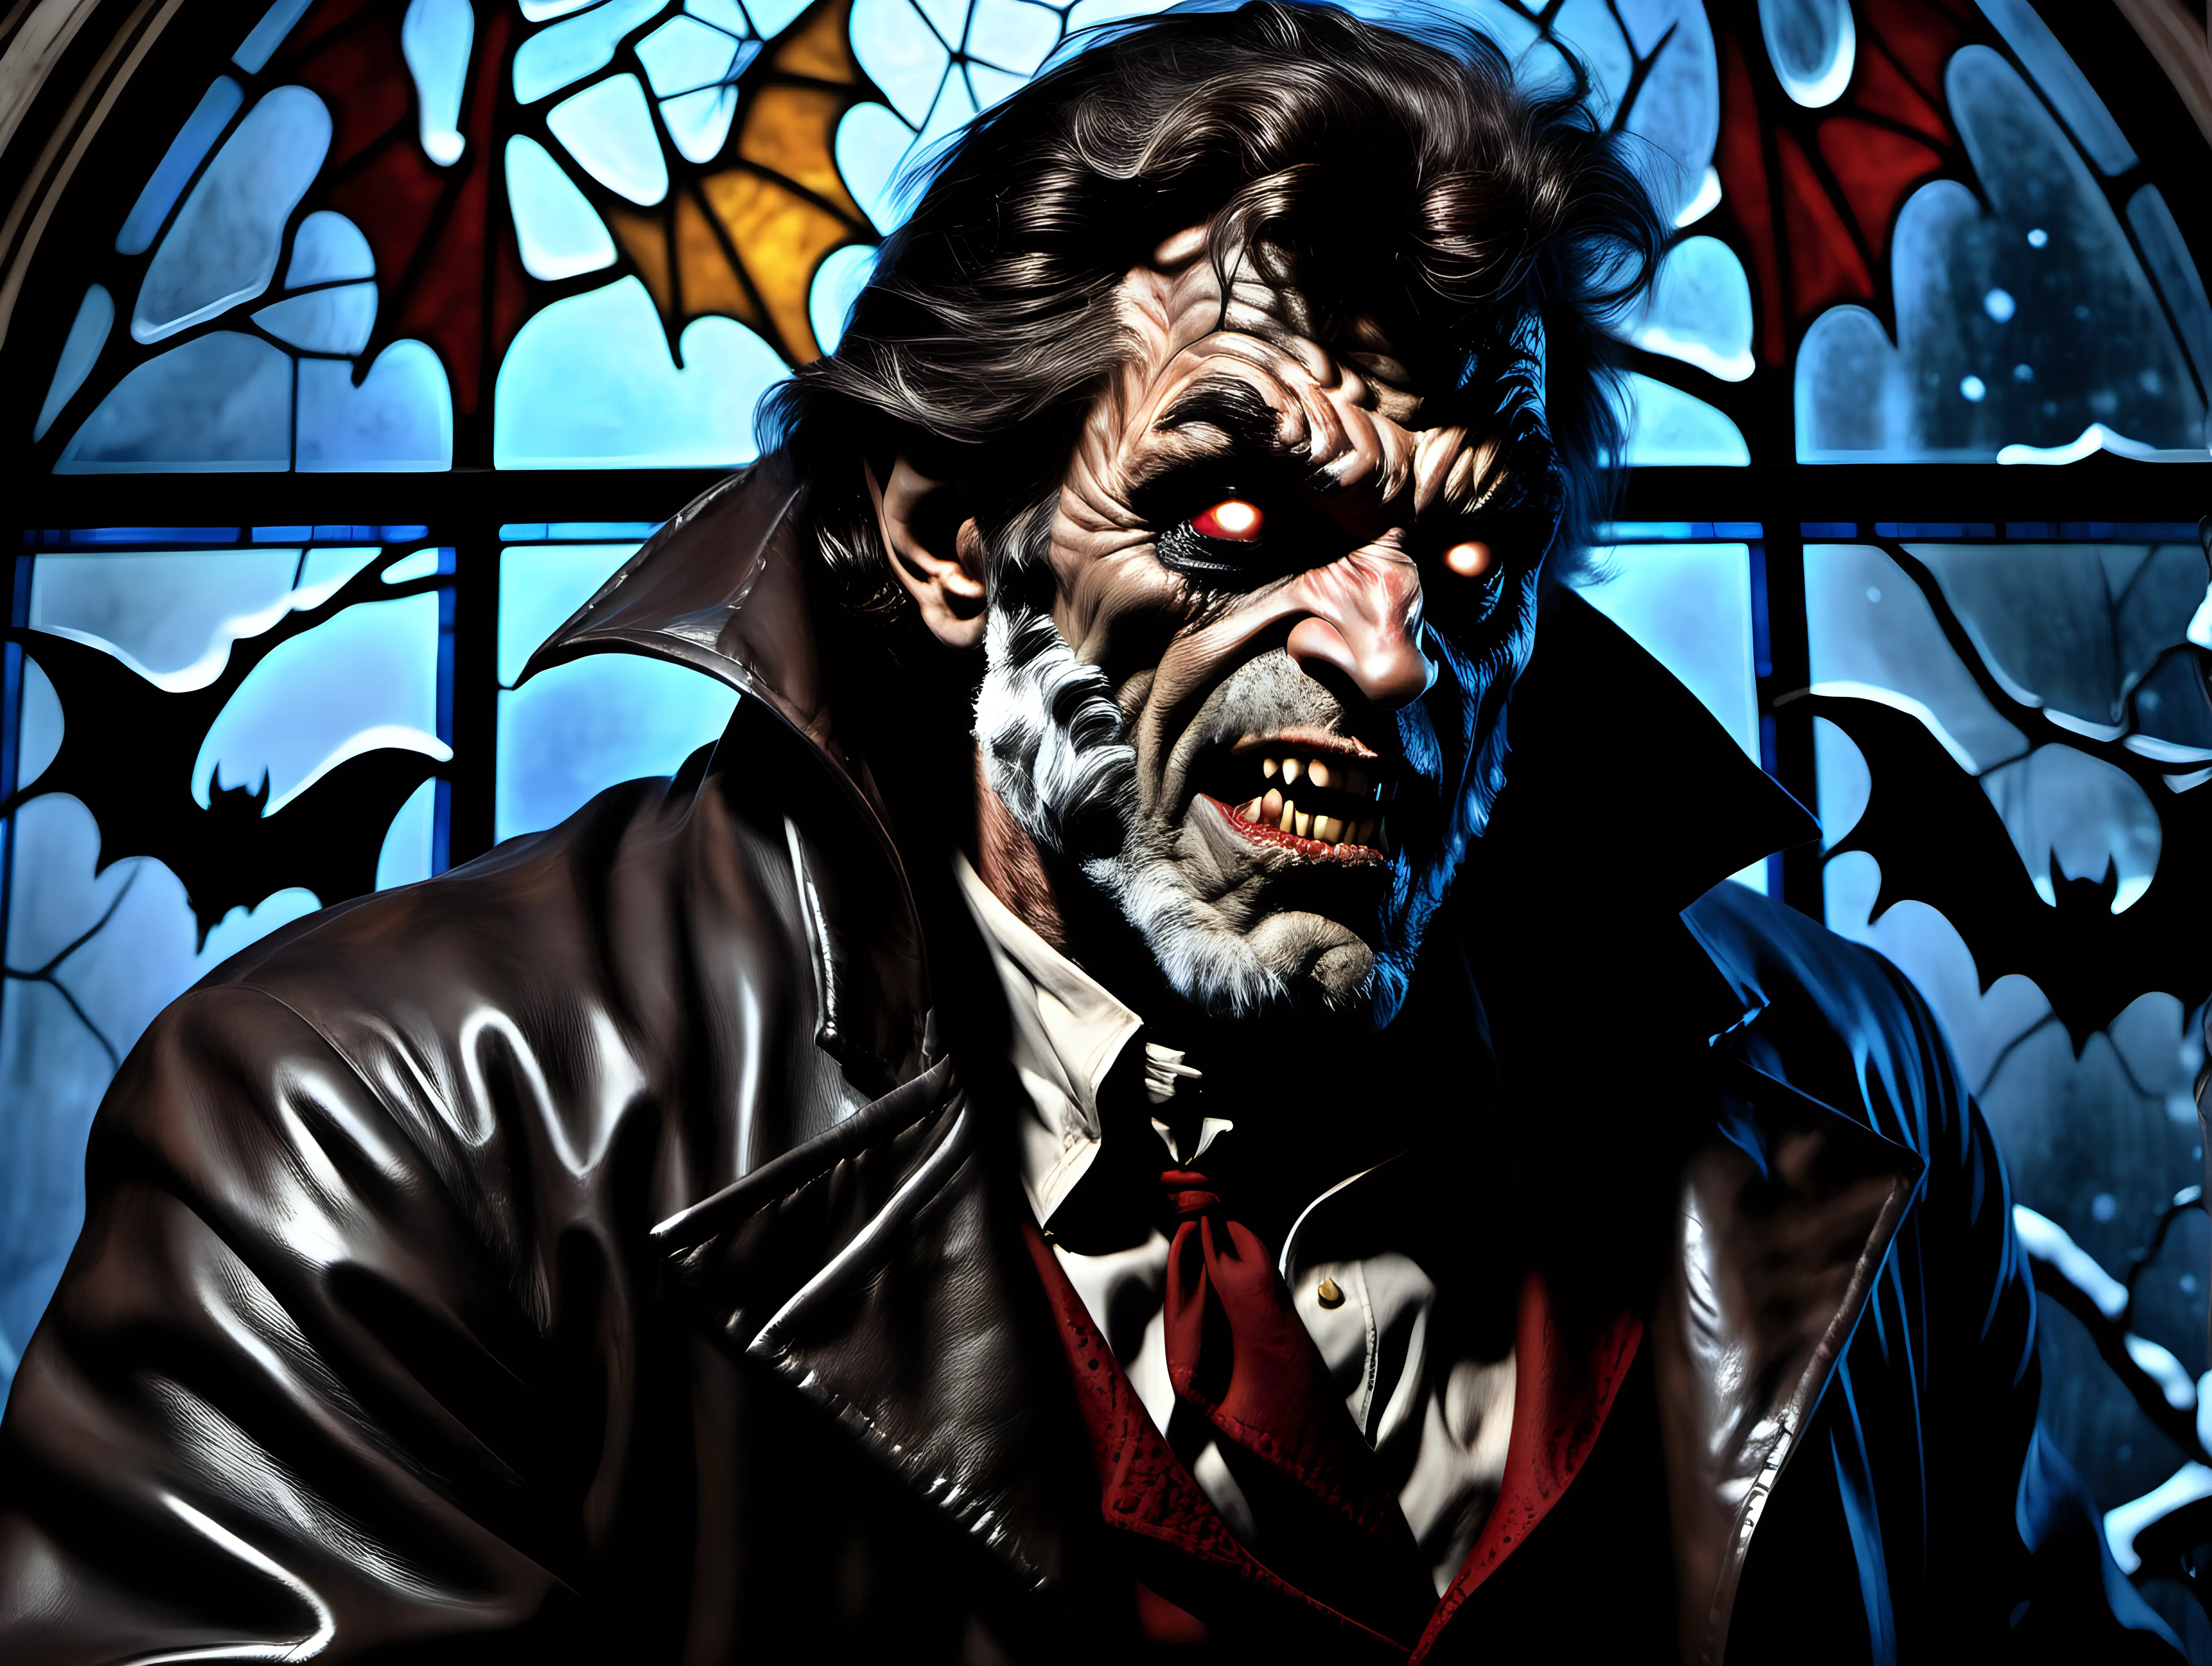 Wolfman Stands Before Winter Stained Glass Window with Vampire Bats